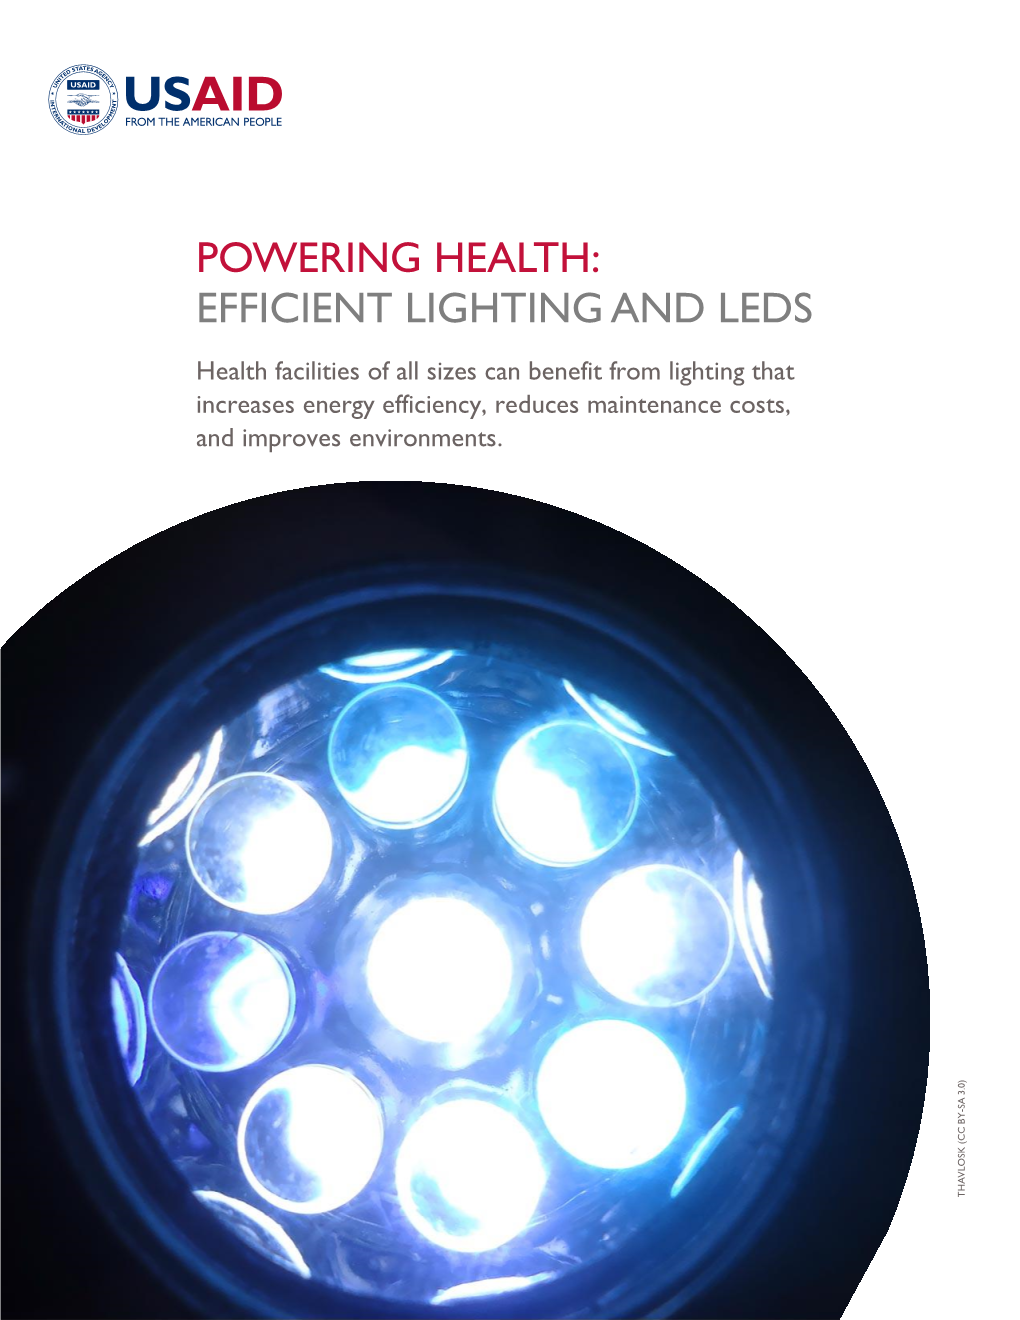 Efficient Lighting and Leds